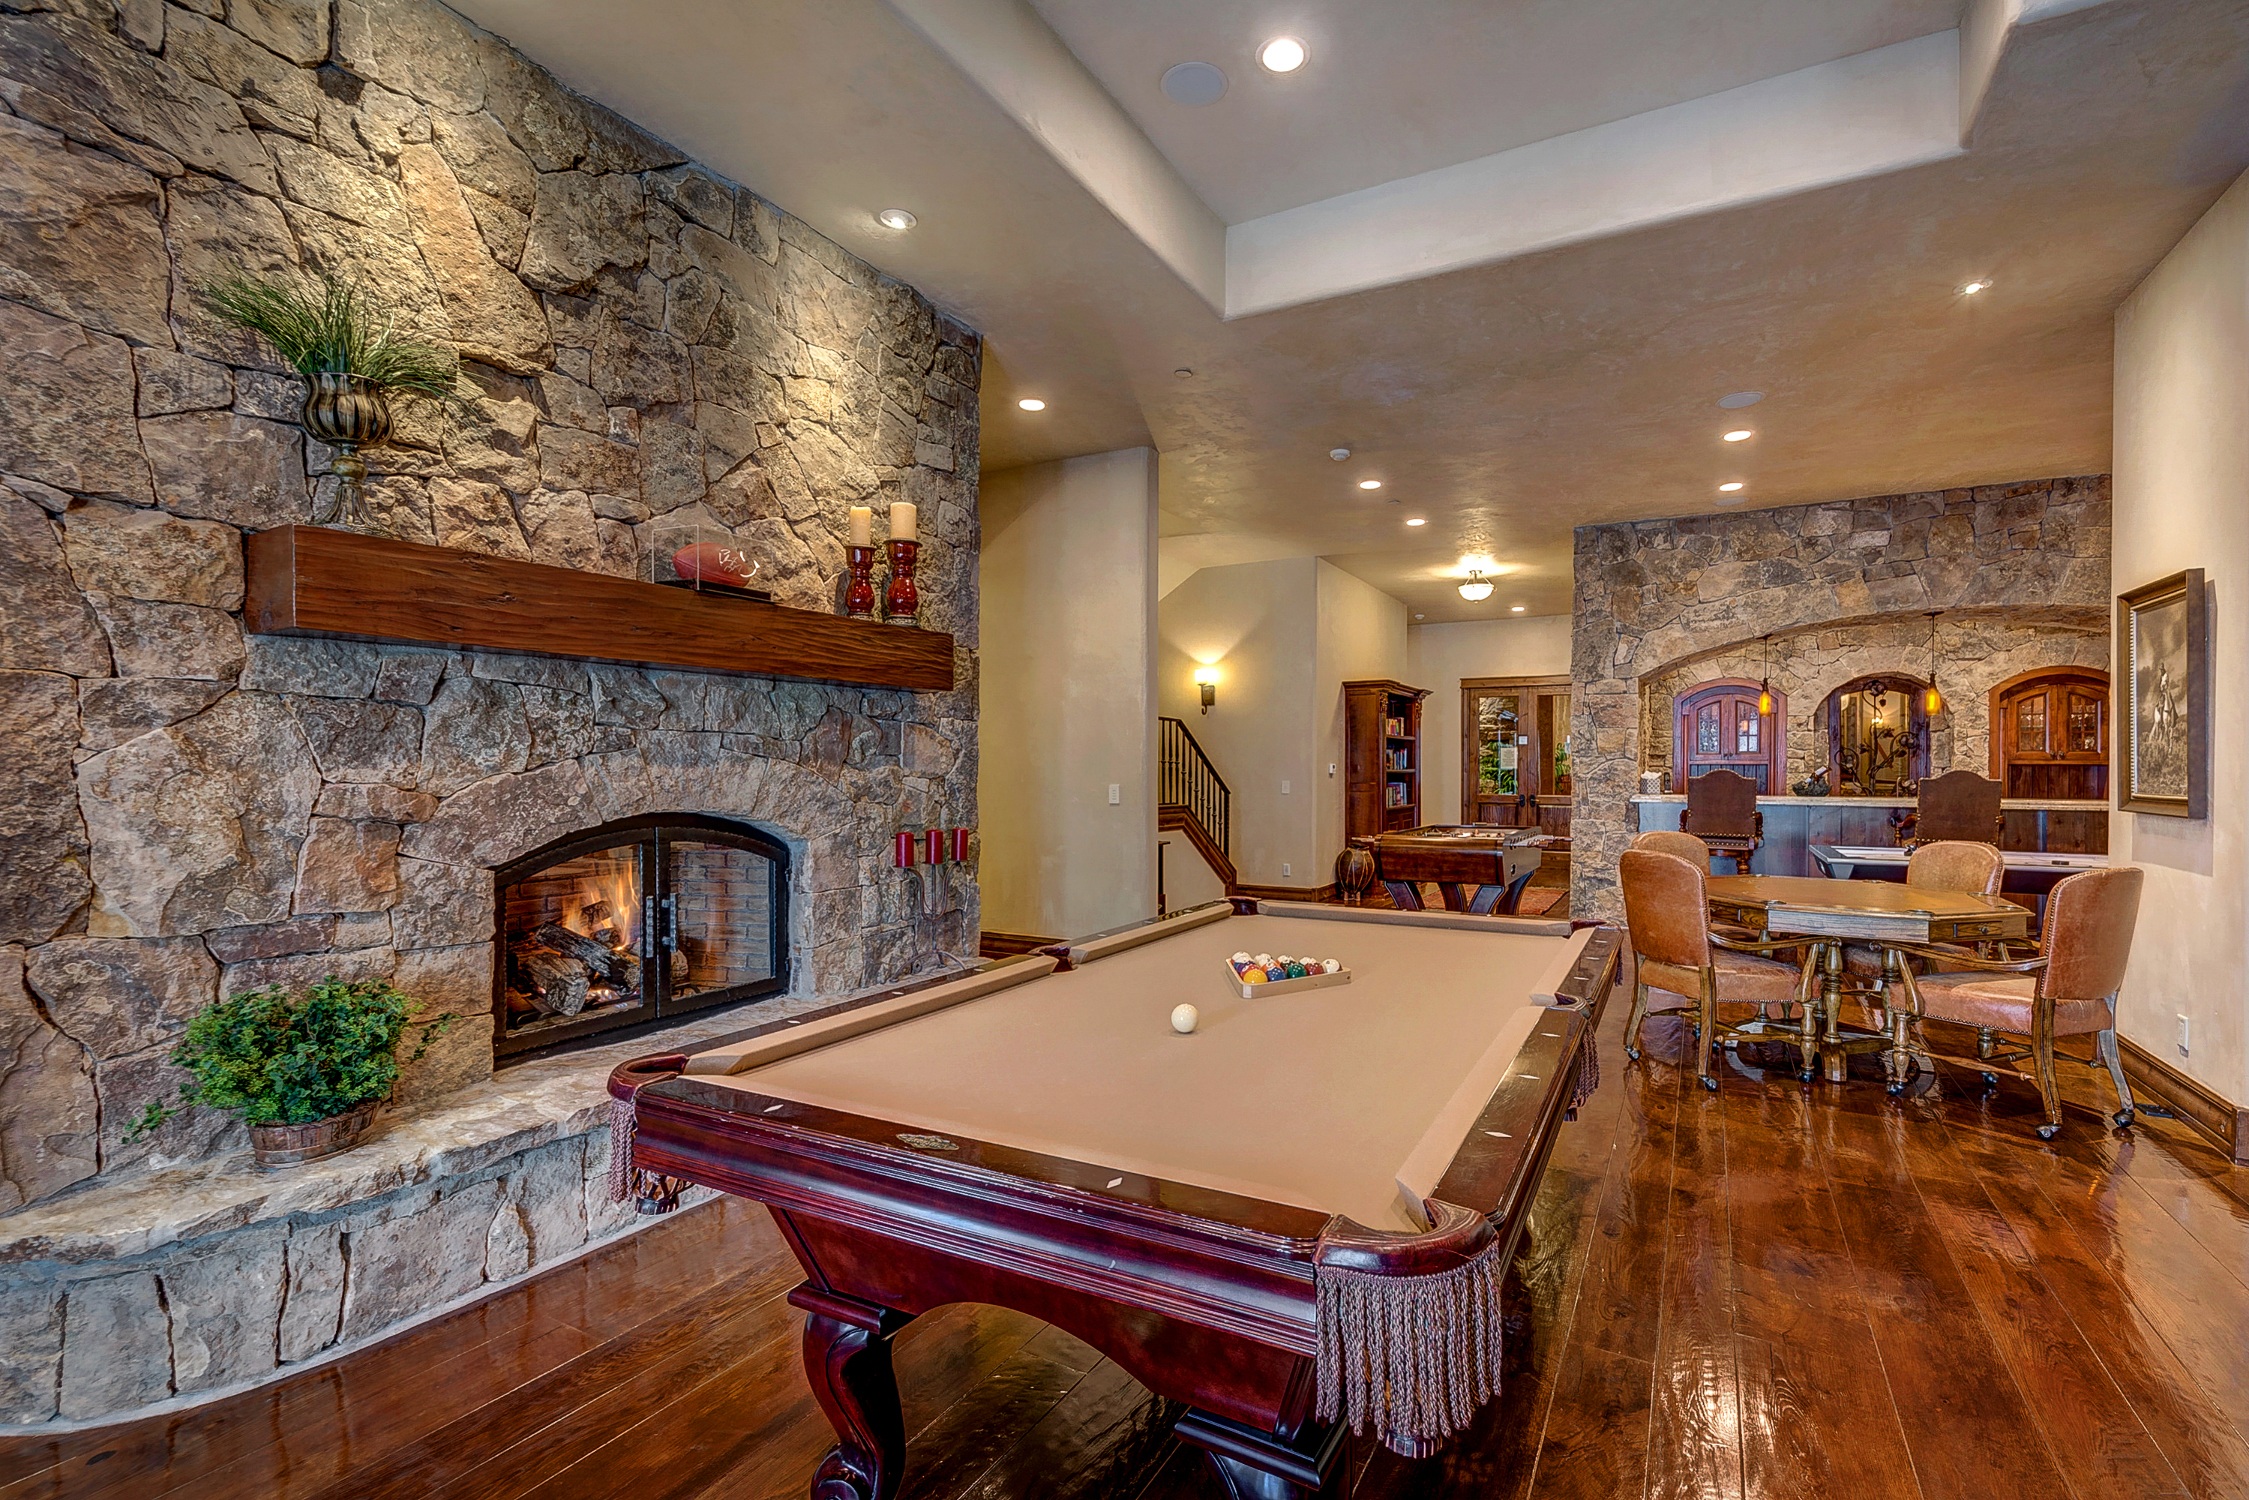 Games Room With Bar Snooker Table - Villa , HD Wallpaper & Backgrounds